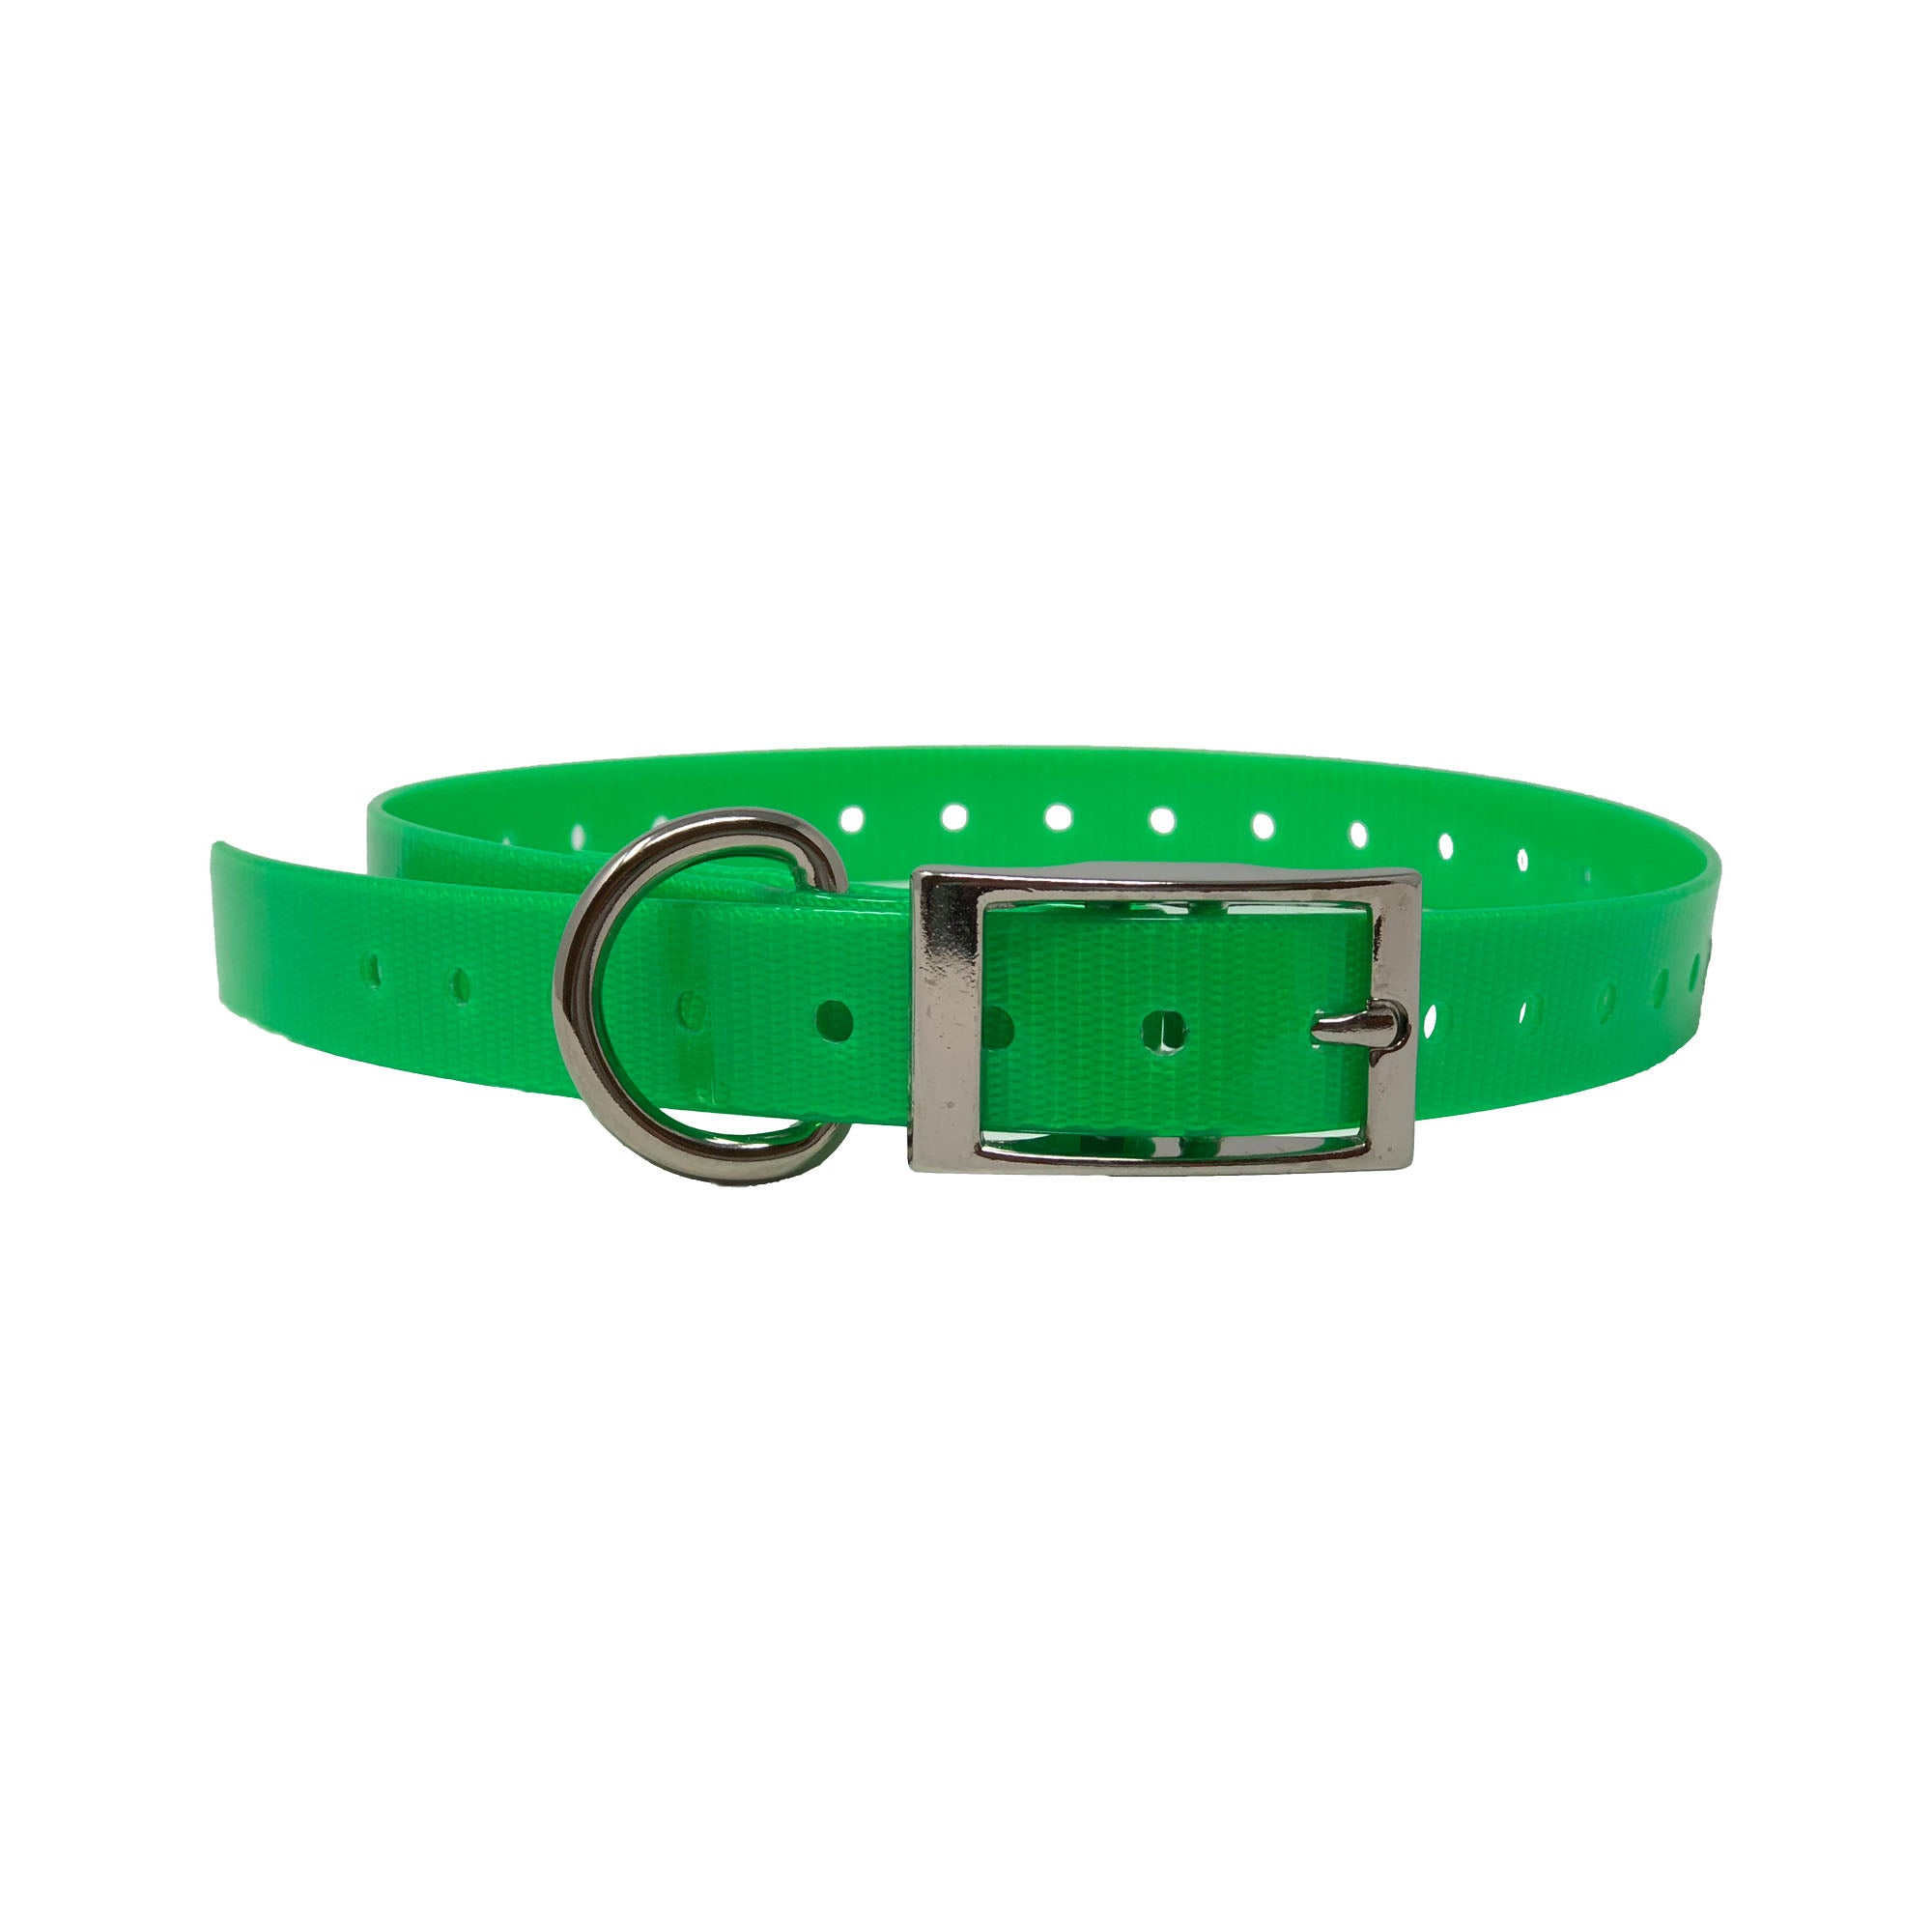 The Buzzard's Roost Replacement Collar Strap 3/4" Neon Green 3/4" x 24"